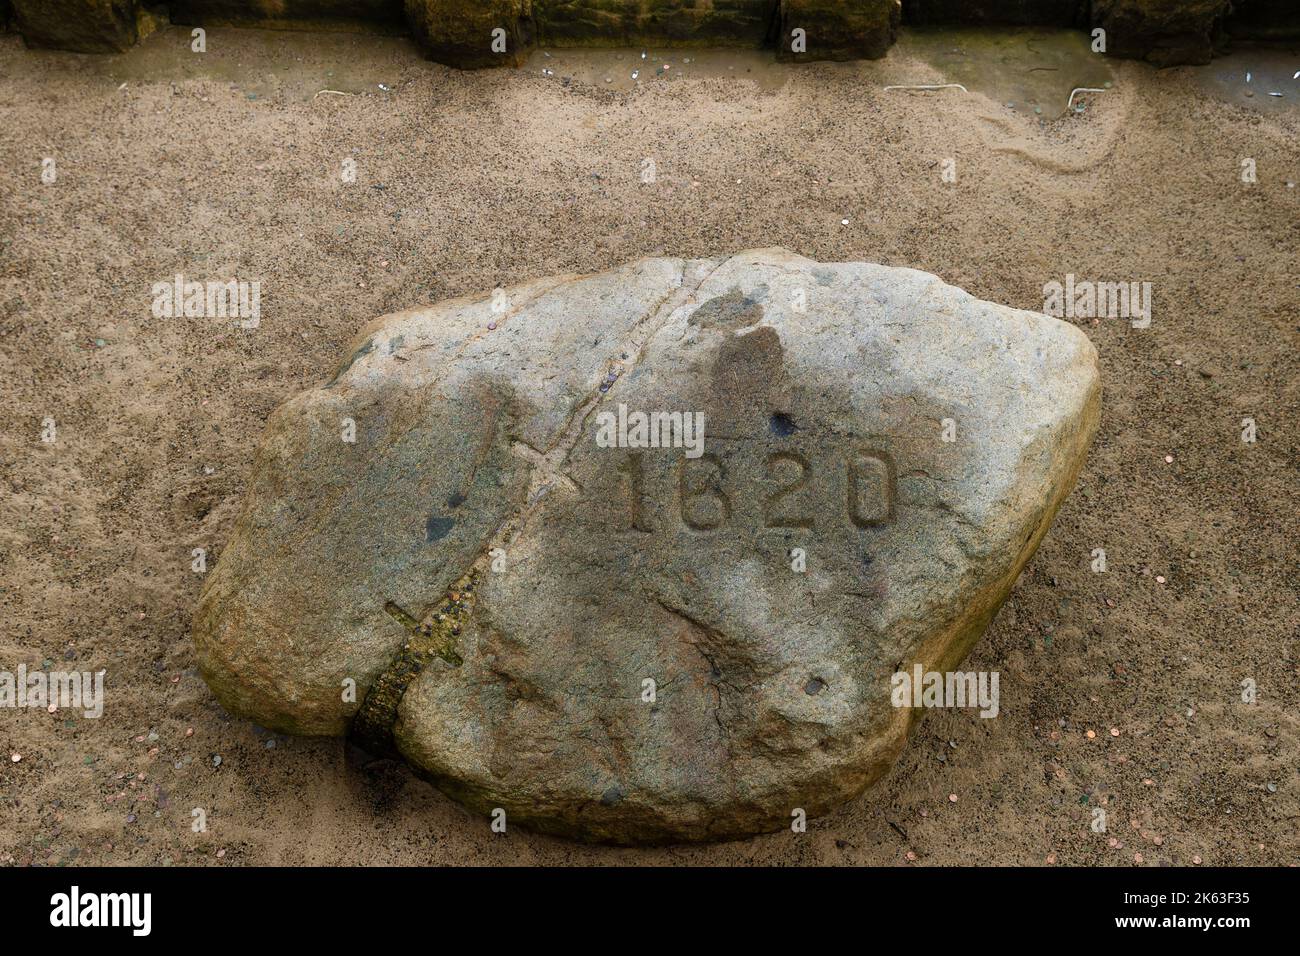 Plymouth, Massachusetts, USA - September 12, 2022:  Close up of the Rock the suppose Pilgrams stepped on when landing in Plymouth. Stock Photo